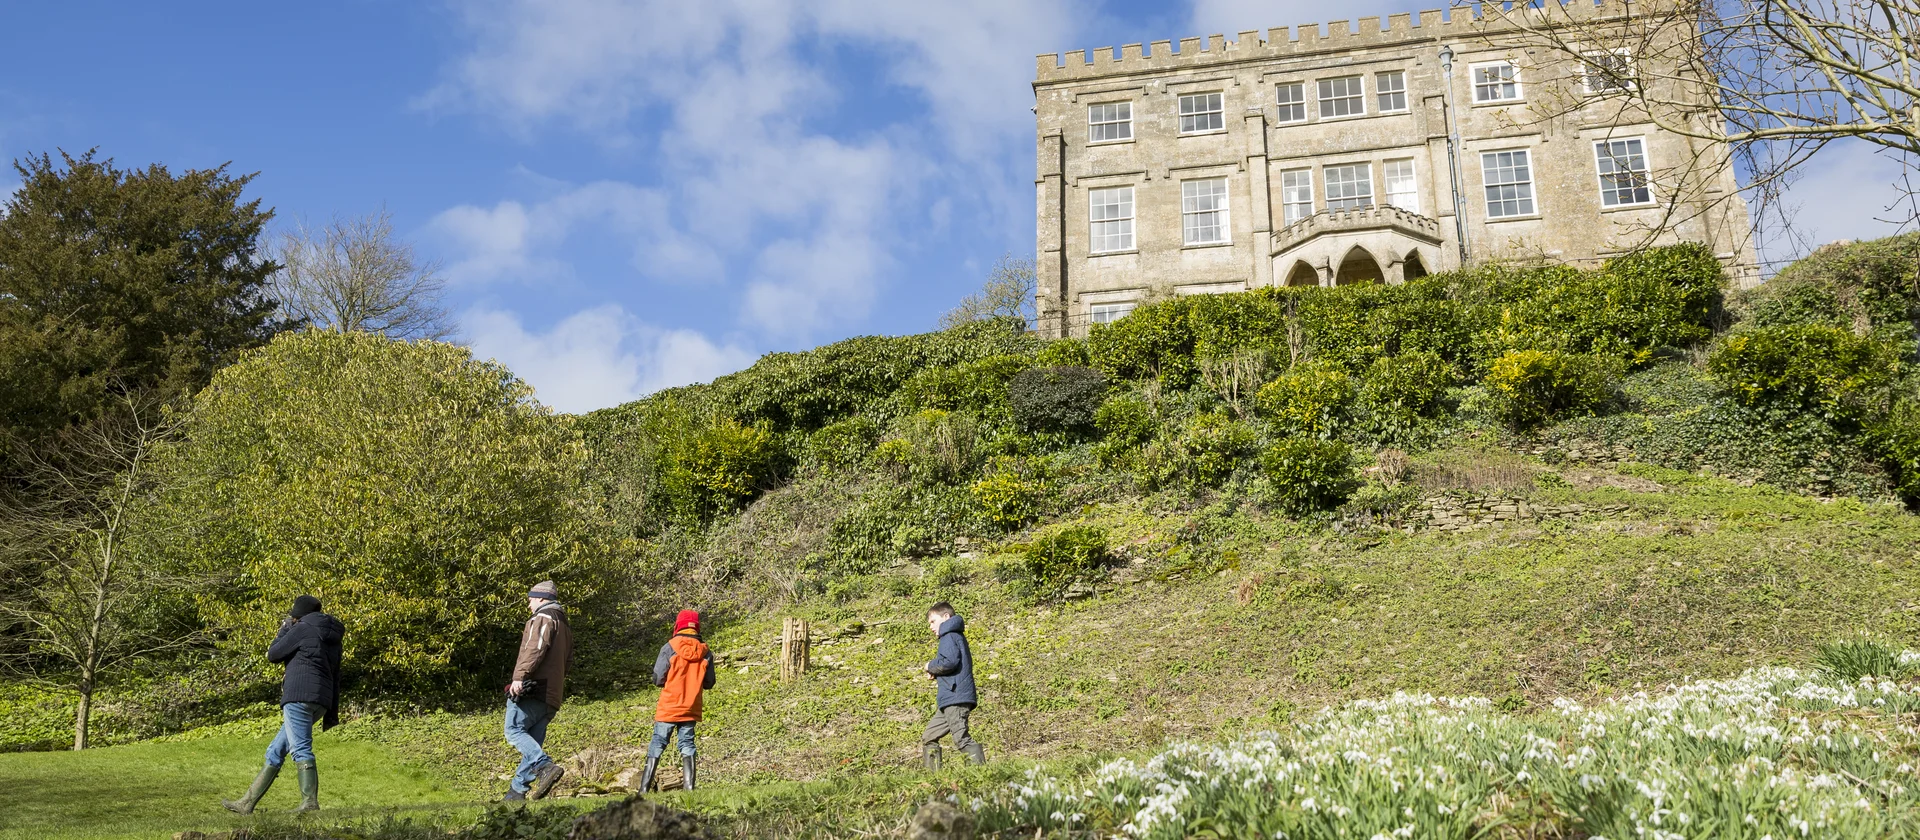 People walking in gardens in front of a grand English stately home